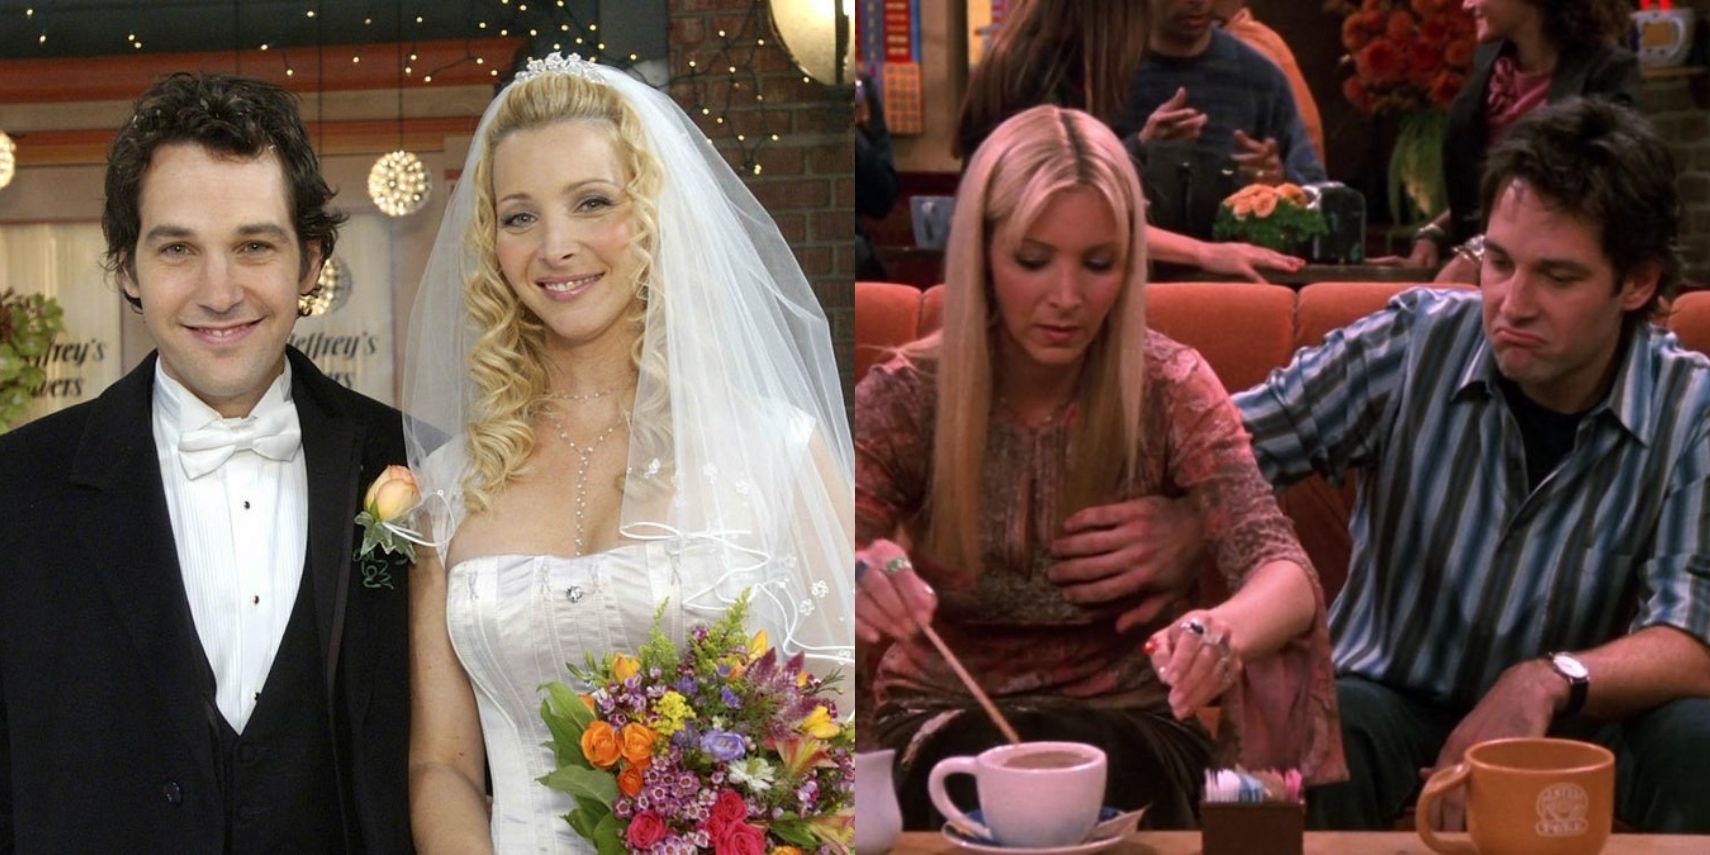 Phoebe and Mike wedding and Central Perk in Friends